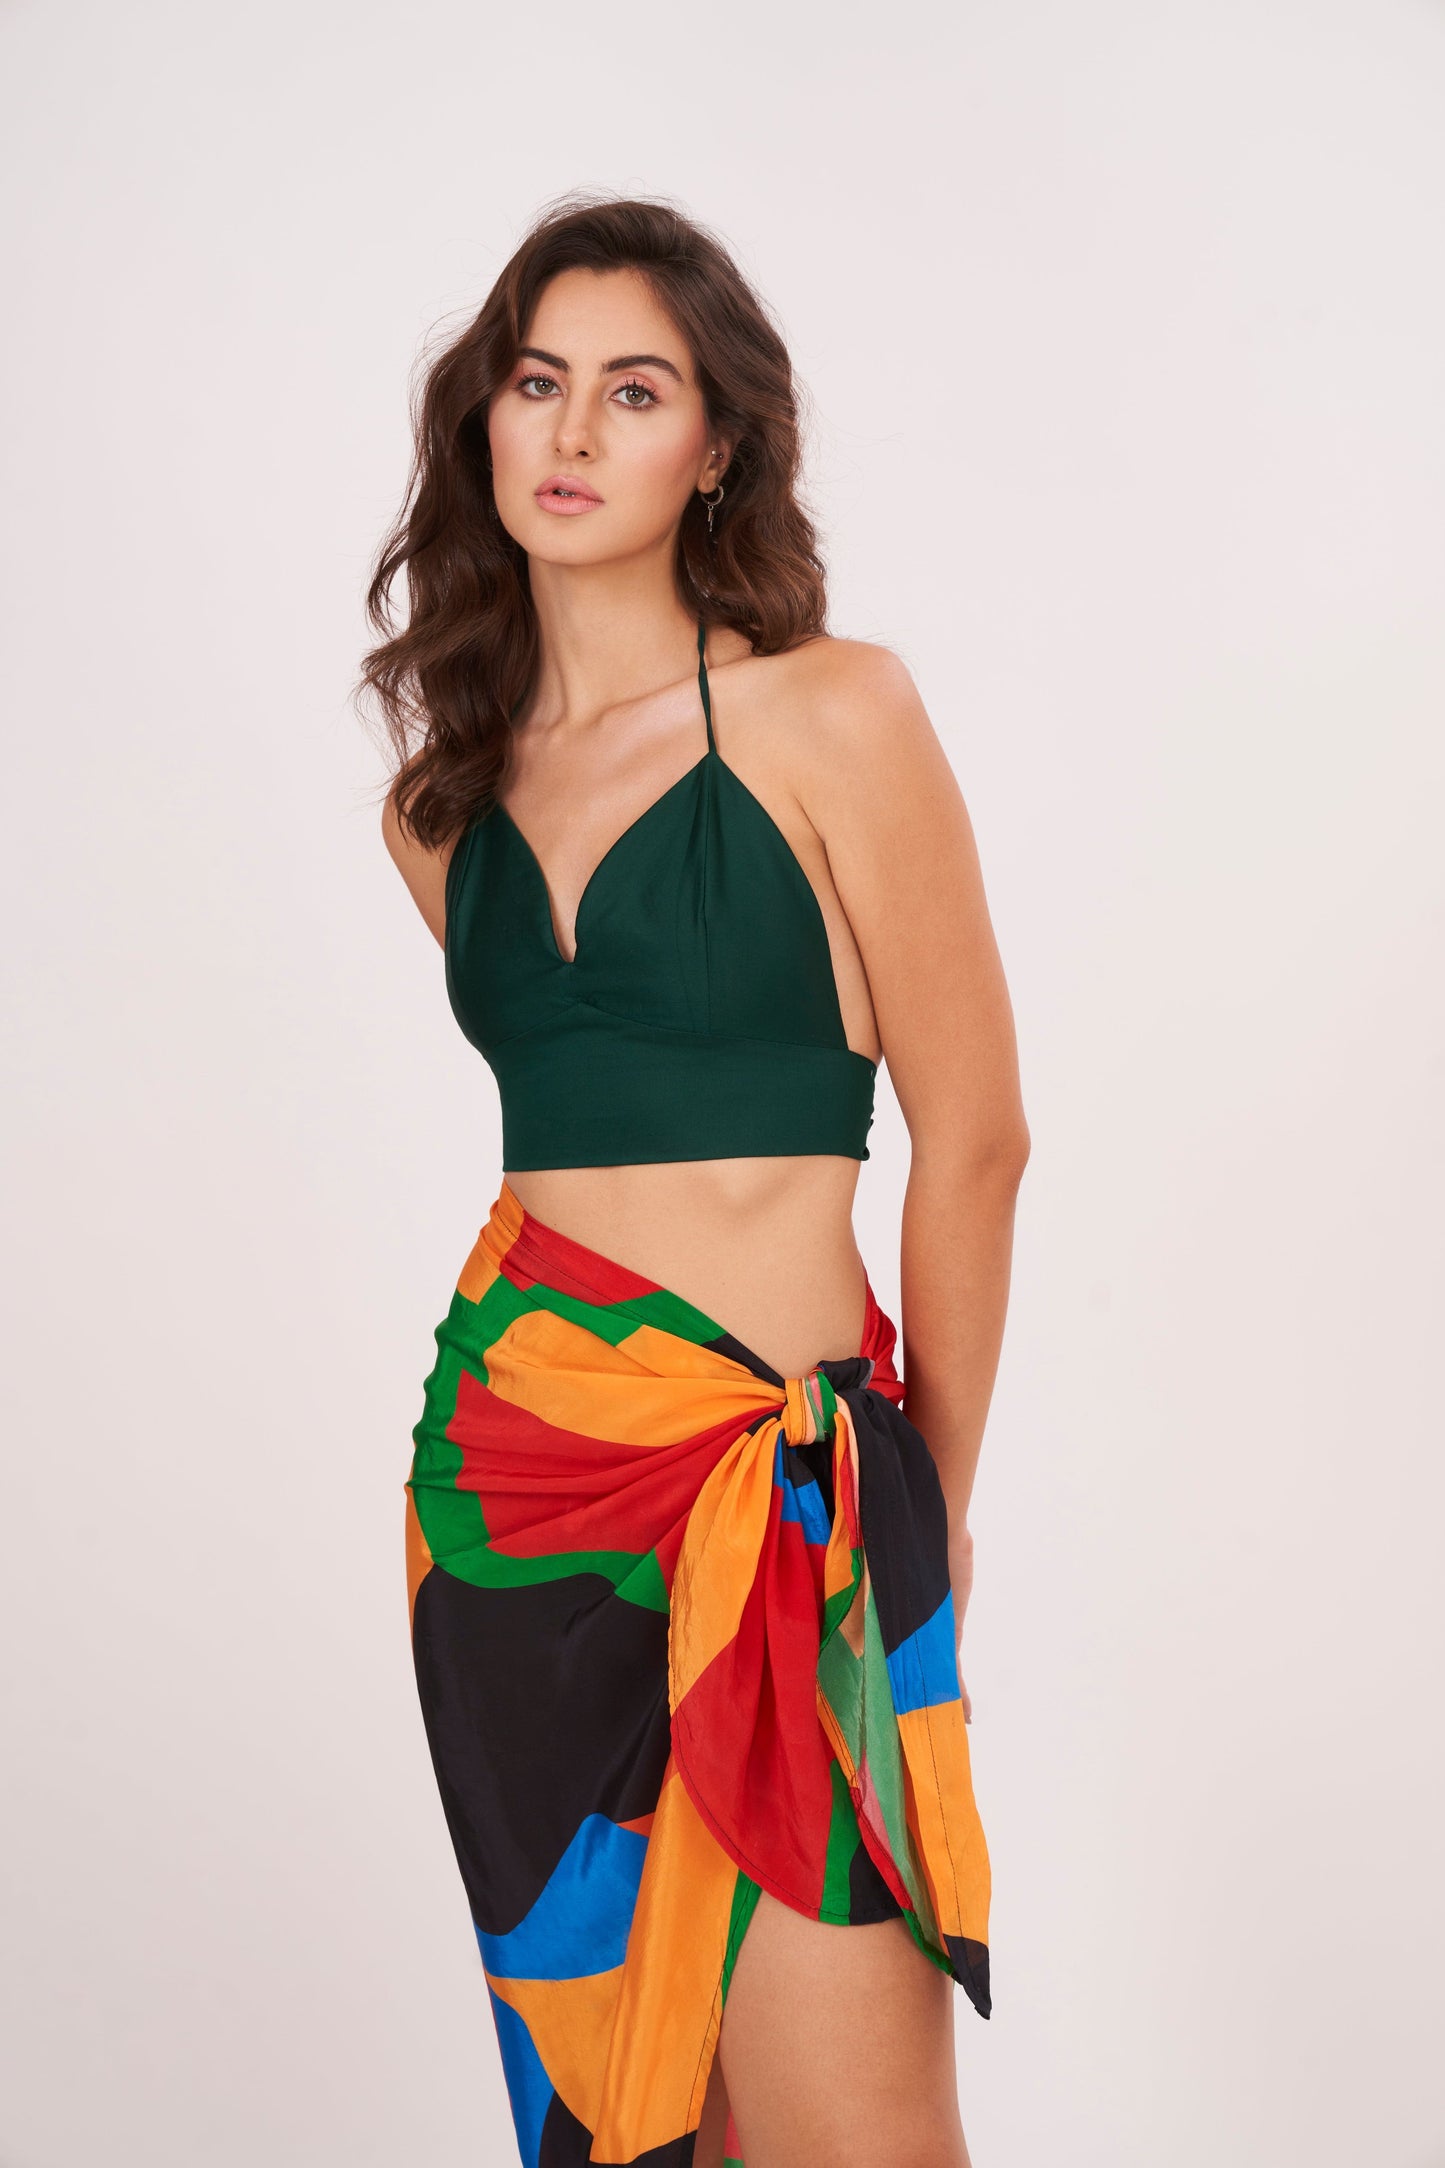 Green bralette crop top with a fitted bodice, sweetheart neckline, and delicate straps, perfect for a stylish and feminine vacation look